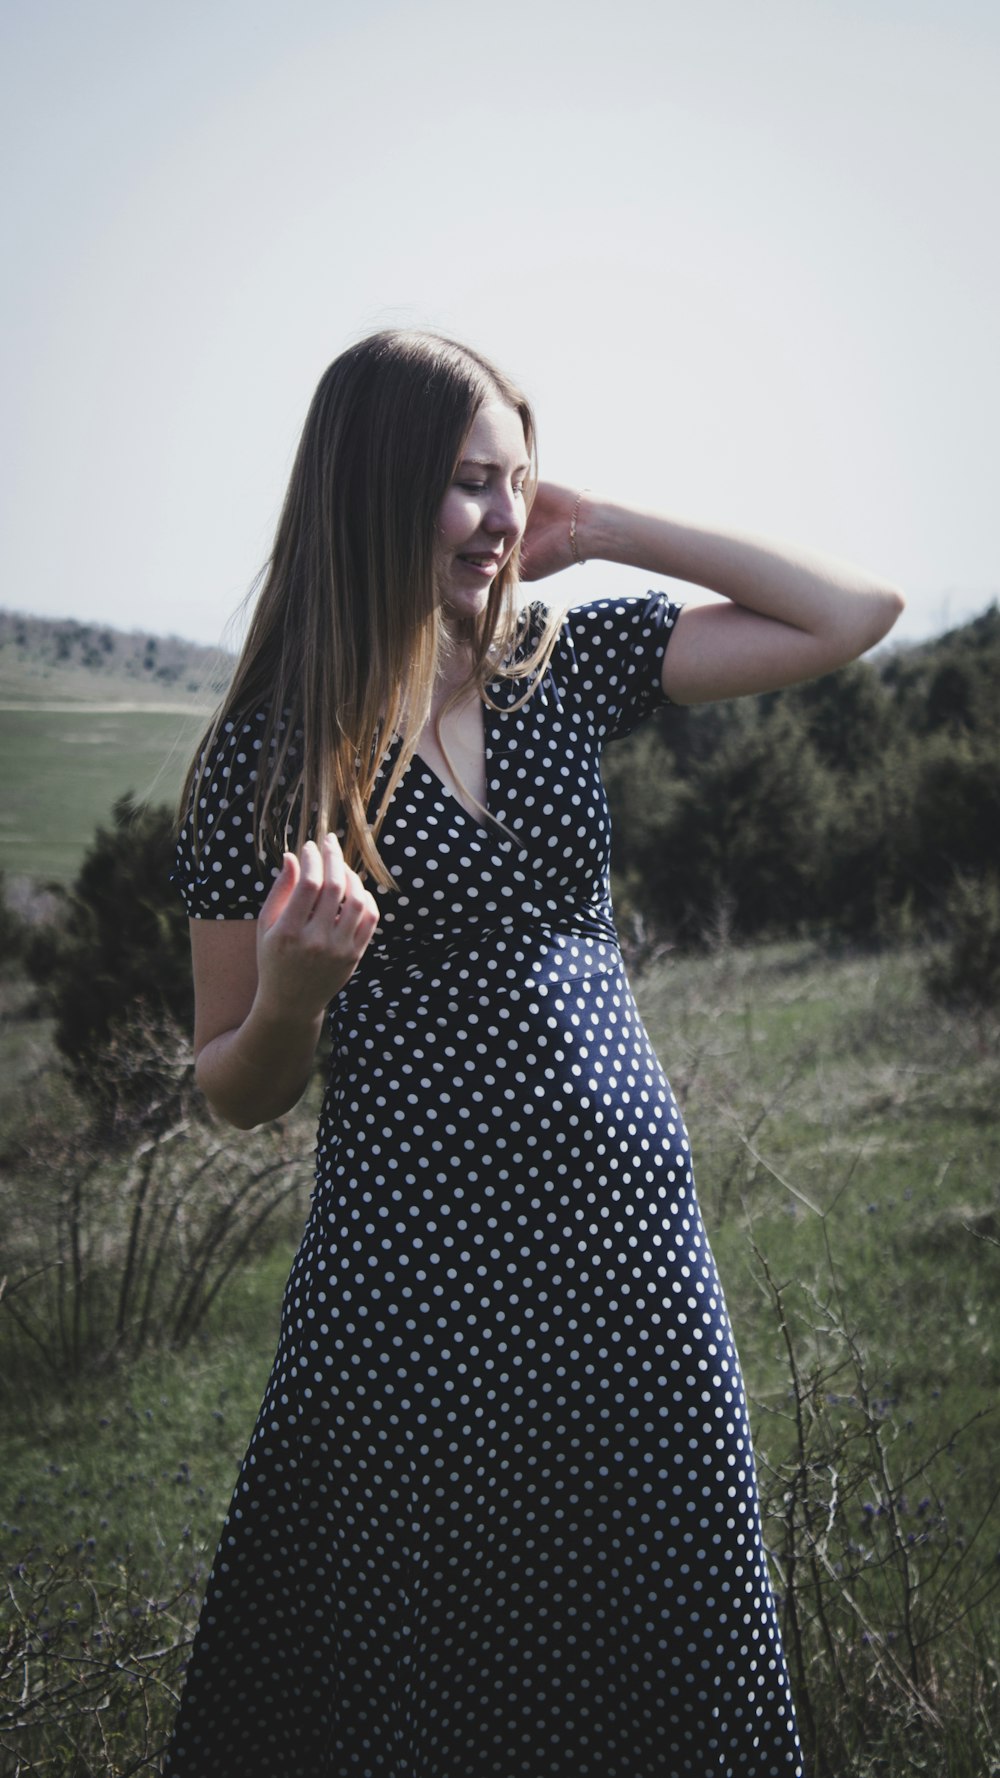 woman in black and white polka dot dress standing on green grass field during daytime